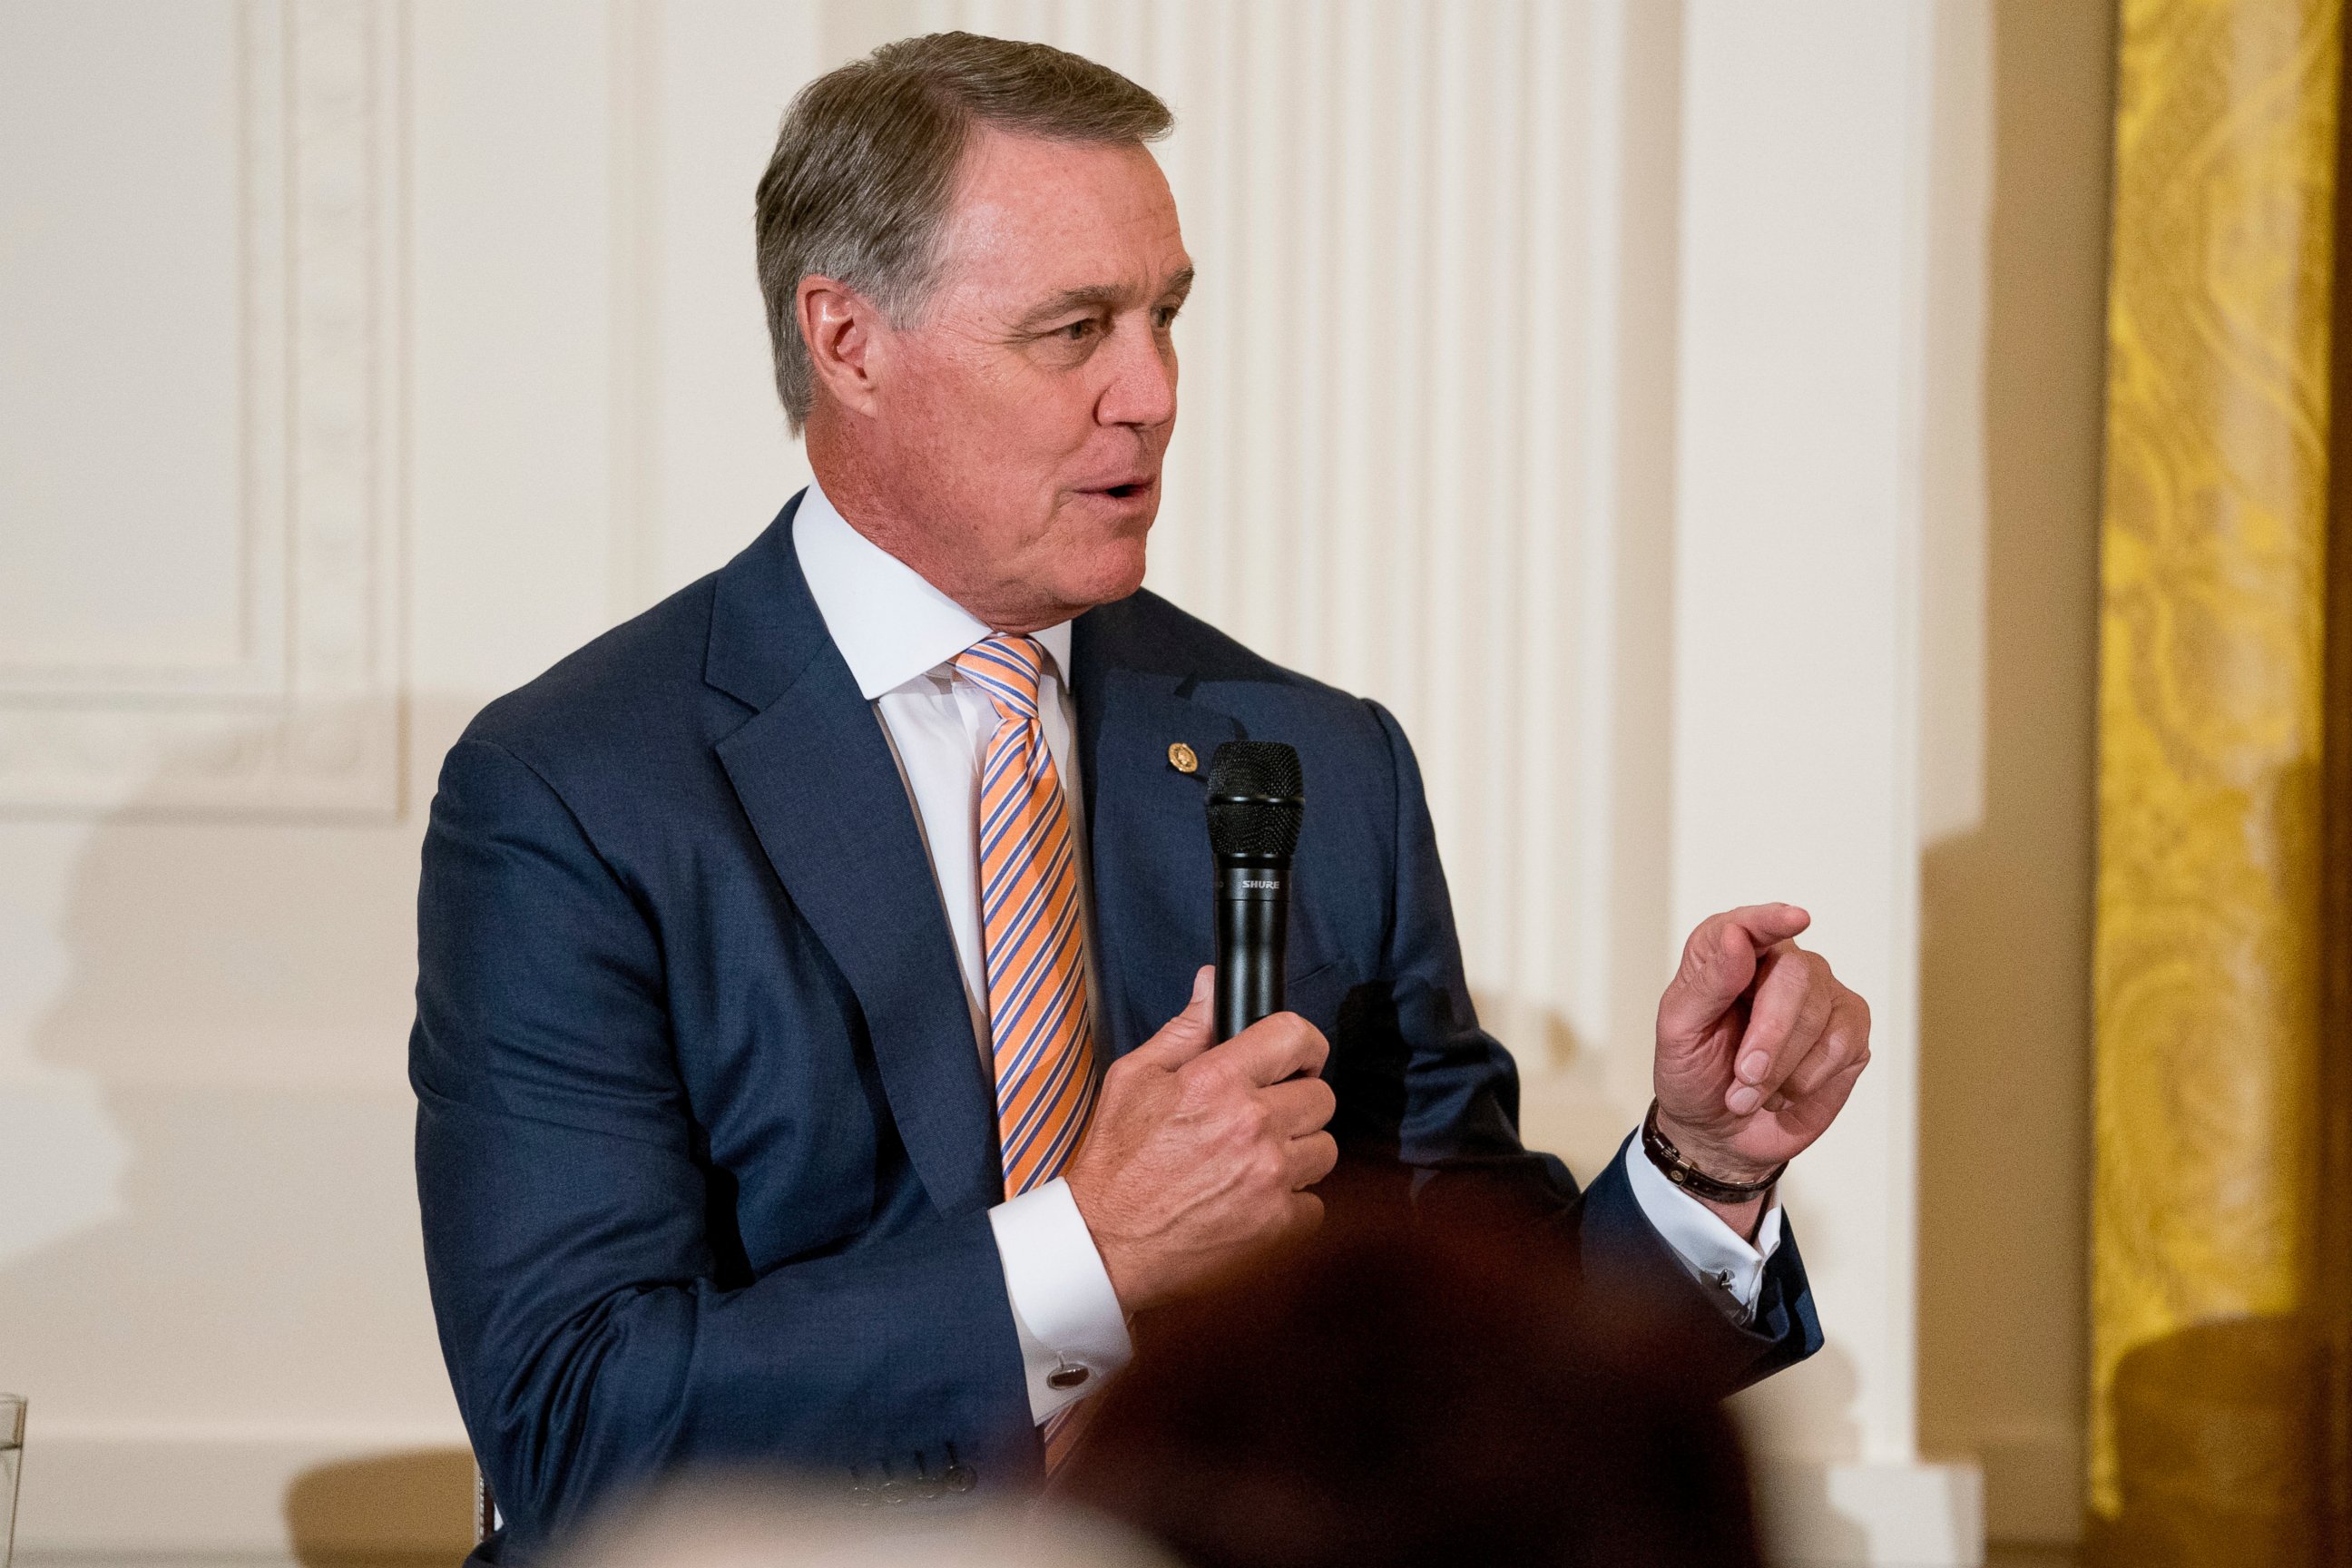 PHOTO: Sen. David Perdue, R-Ga., speaks at a roundtable during an event to salute U.S. Immigration and Customs Enforcement officers and U.S. Customs and Border Protection agents in the East Room of the White House in Washington, Monday, Aug. 20, 2018.